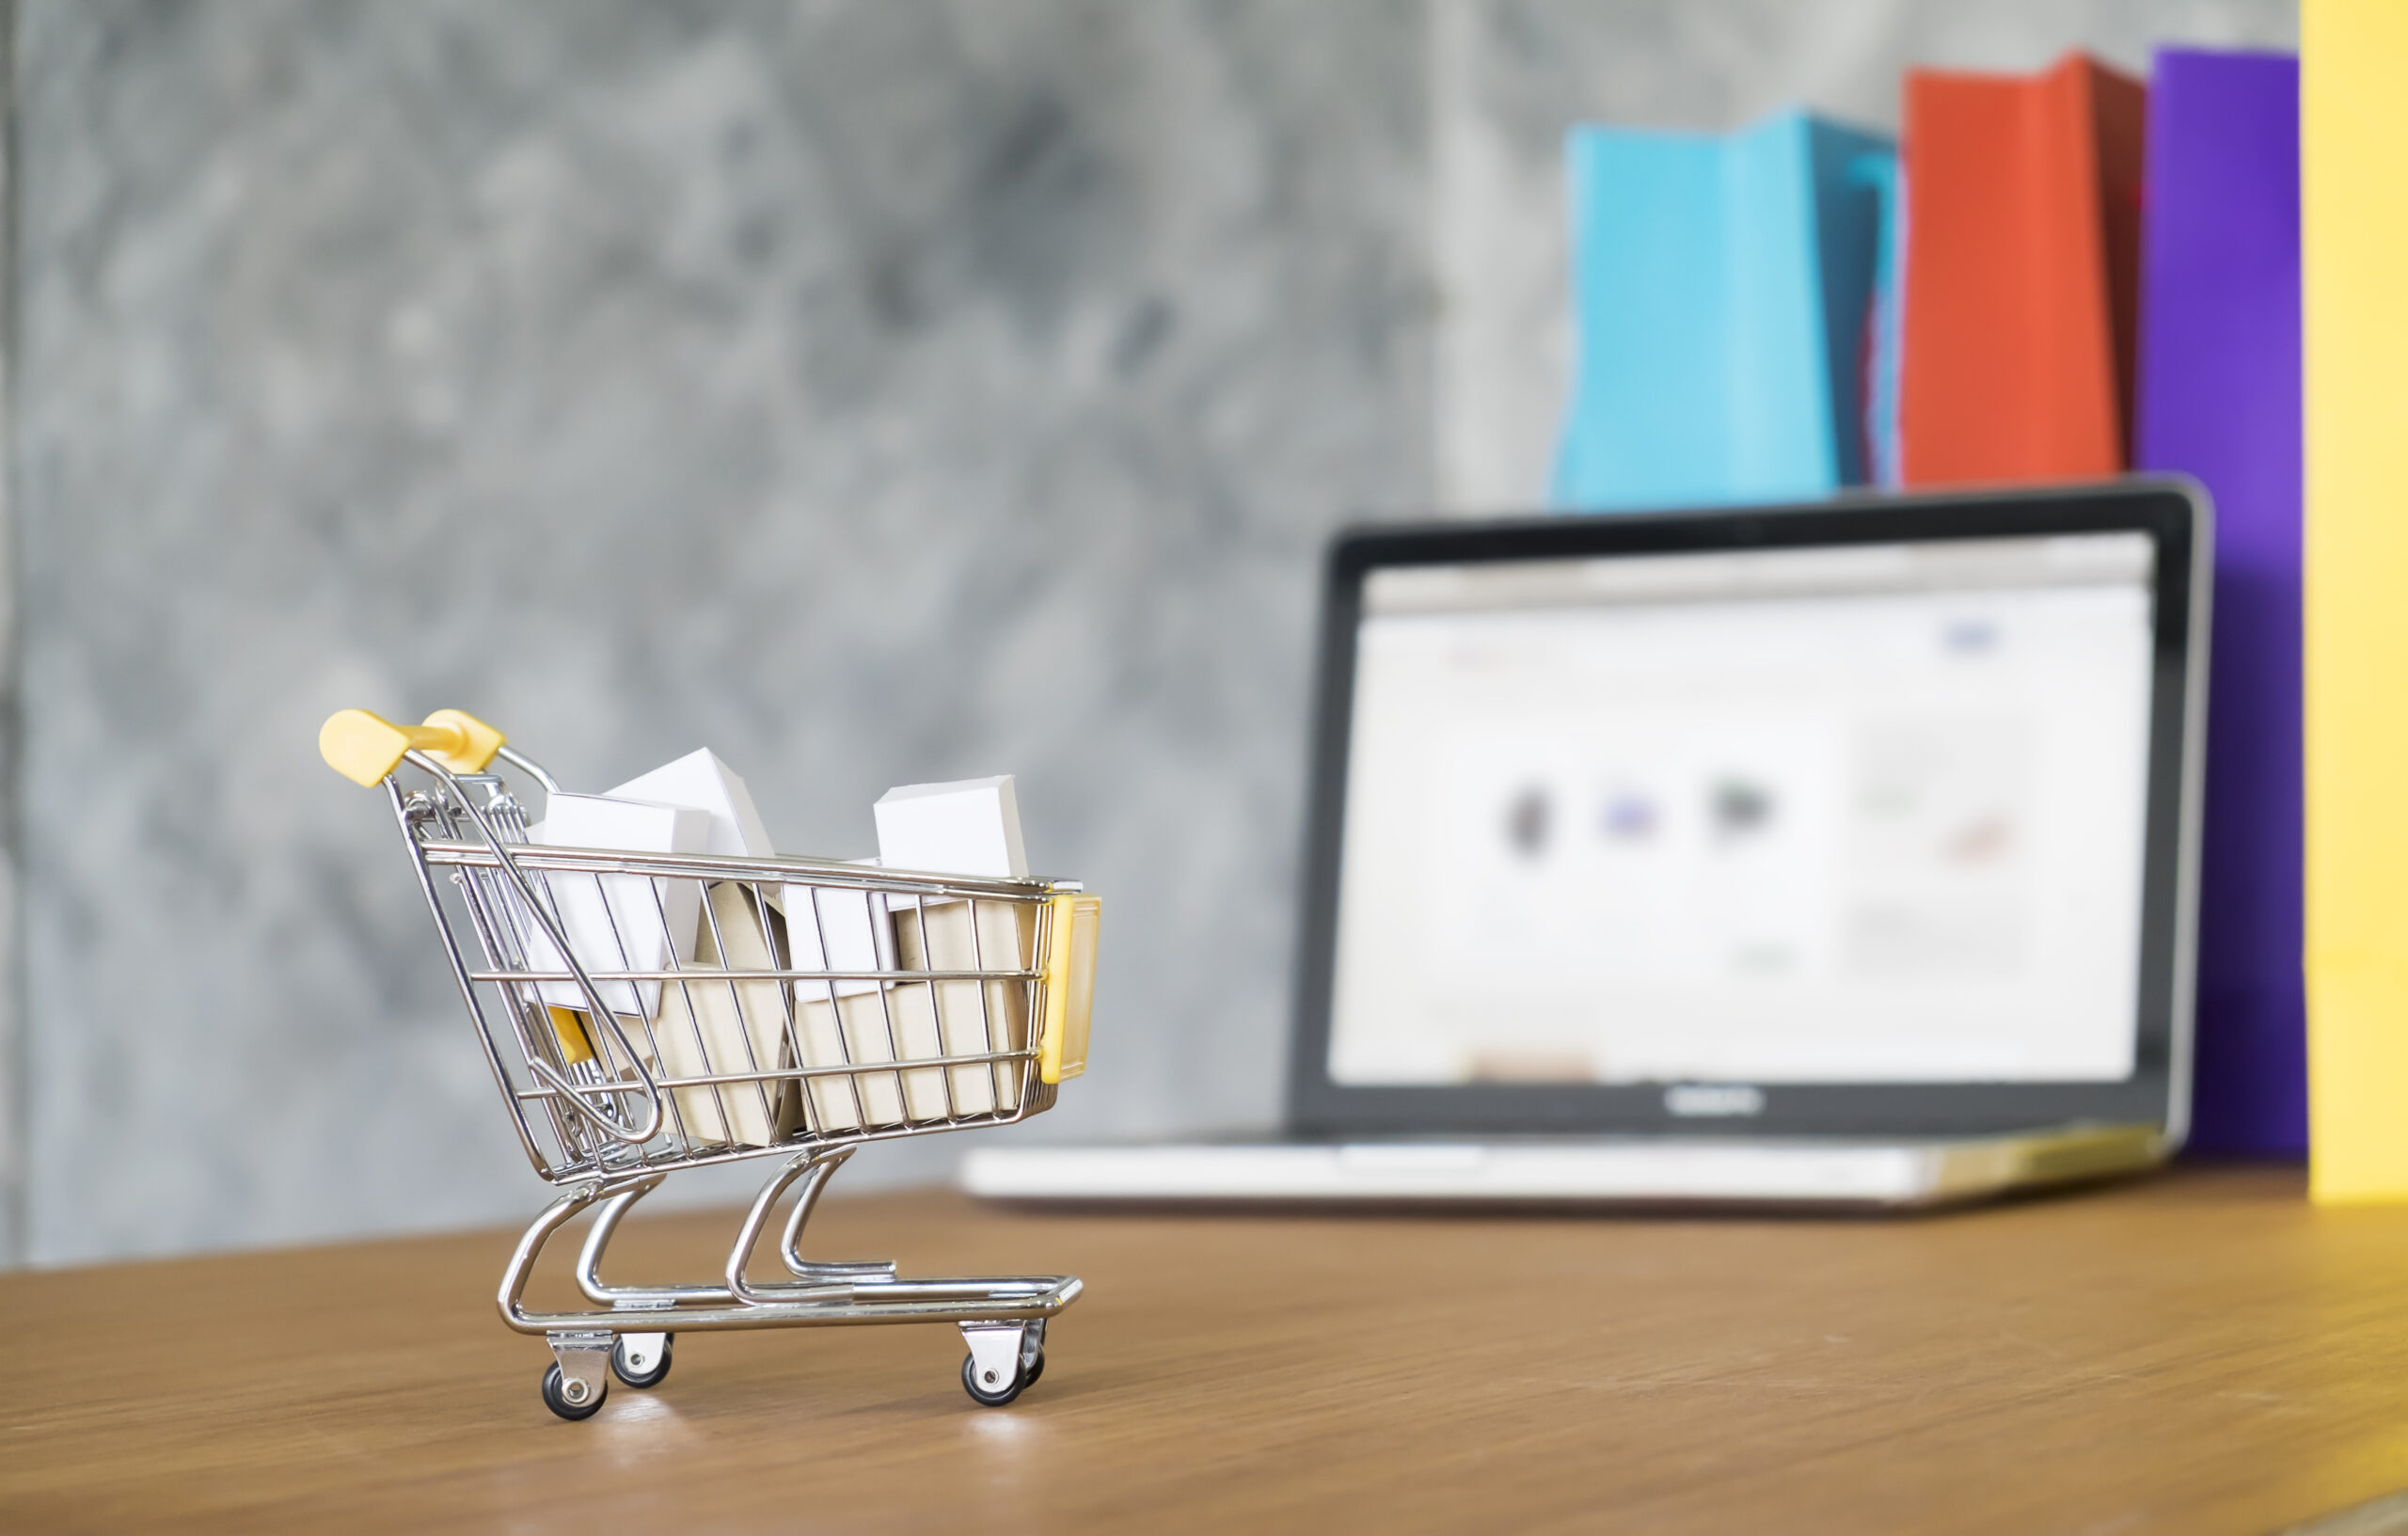 The image of eCommerce cart along with the laptop